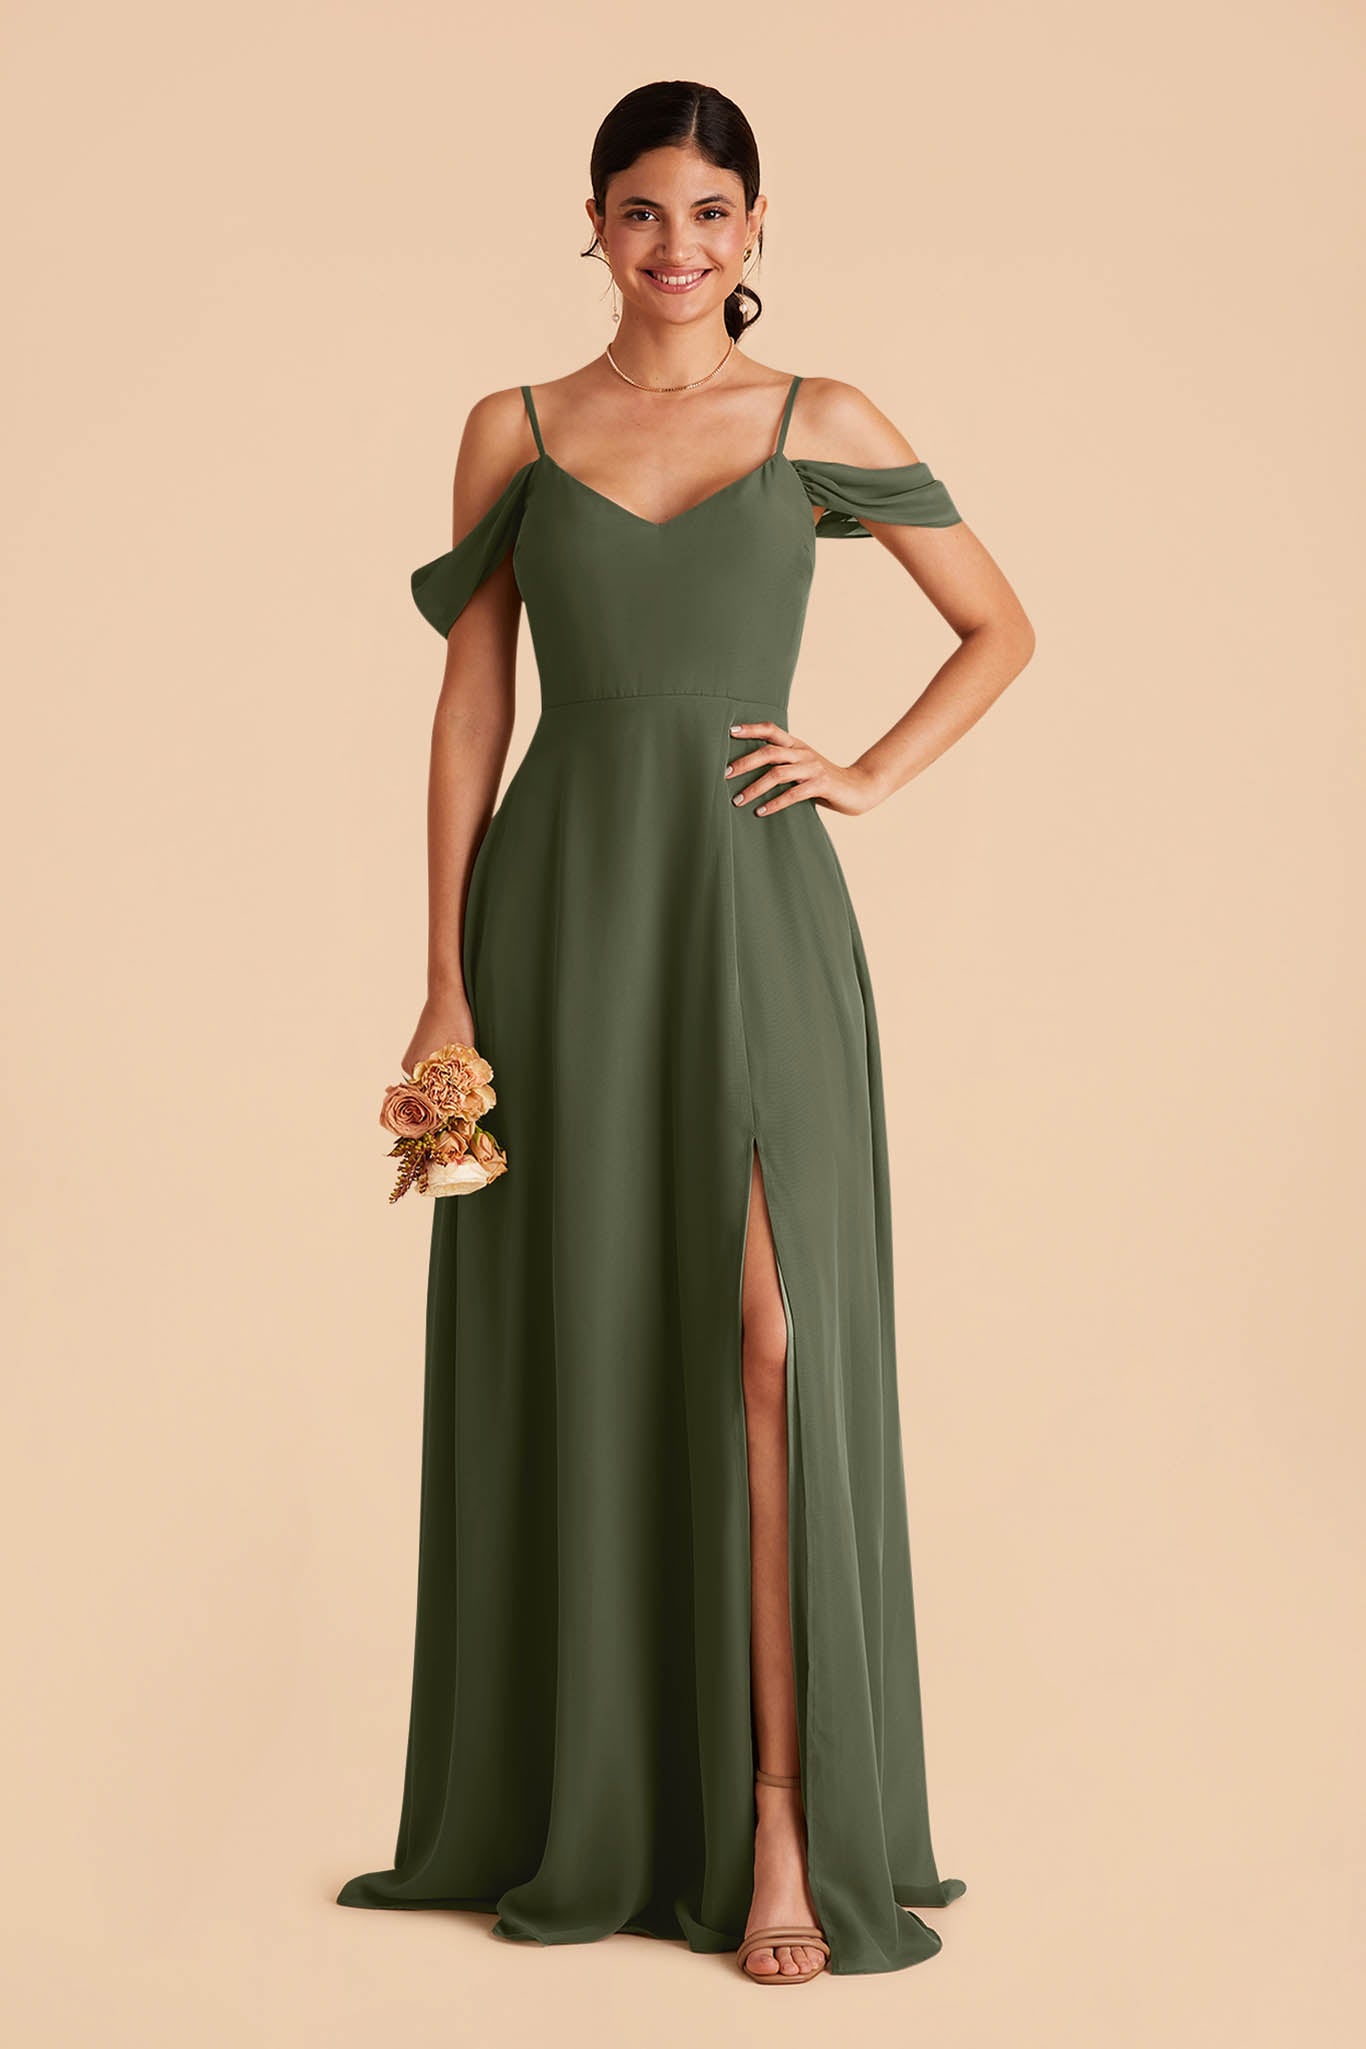 Olive Devin Convertible Dress by Birdy Grey